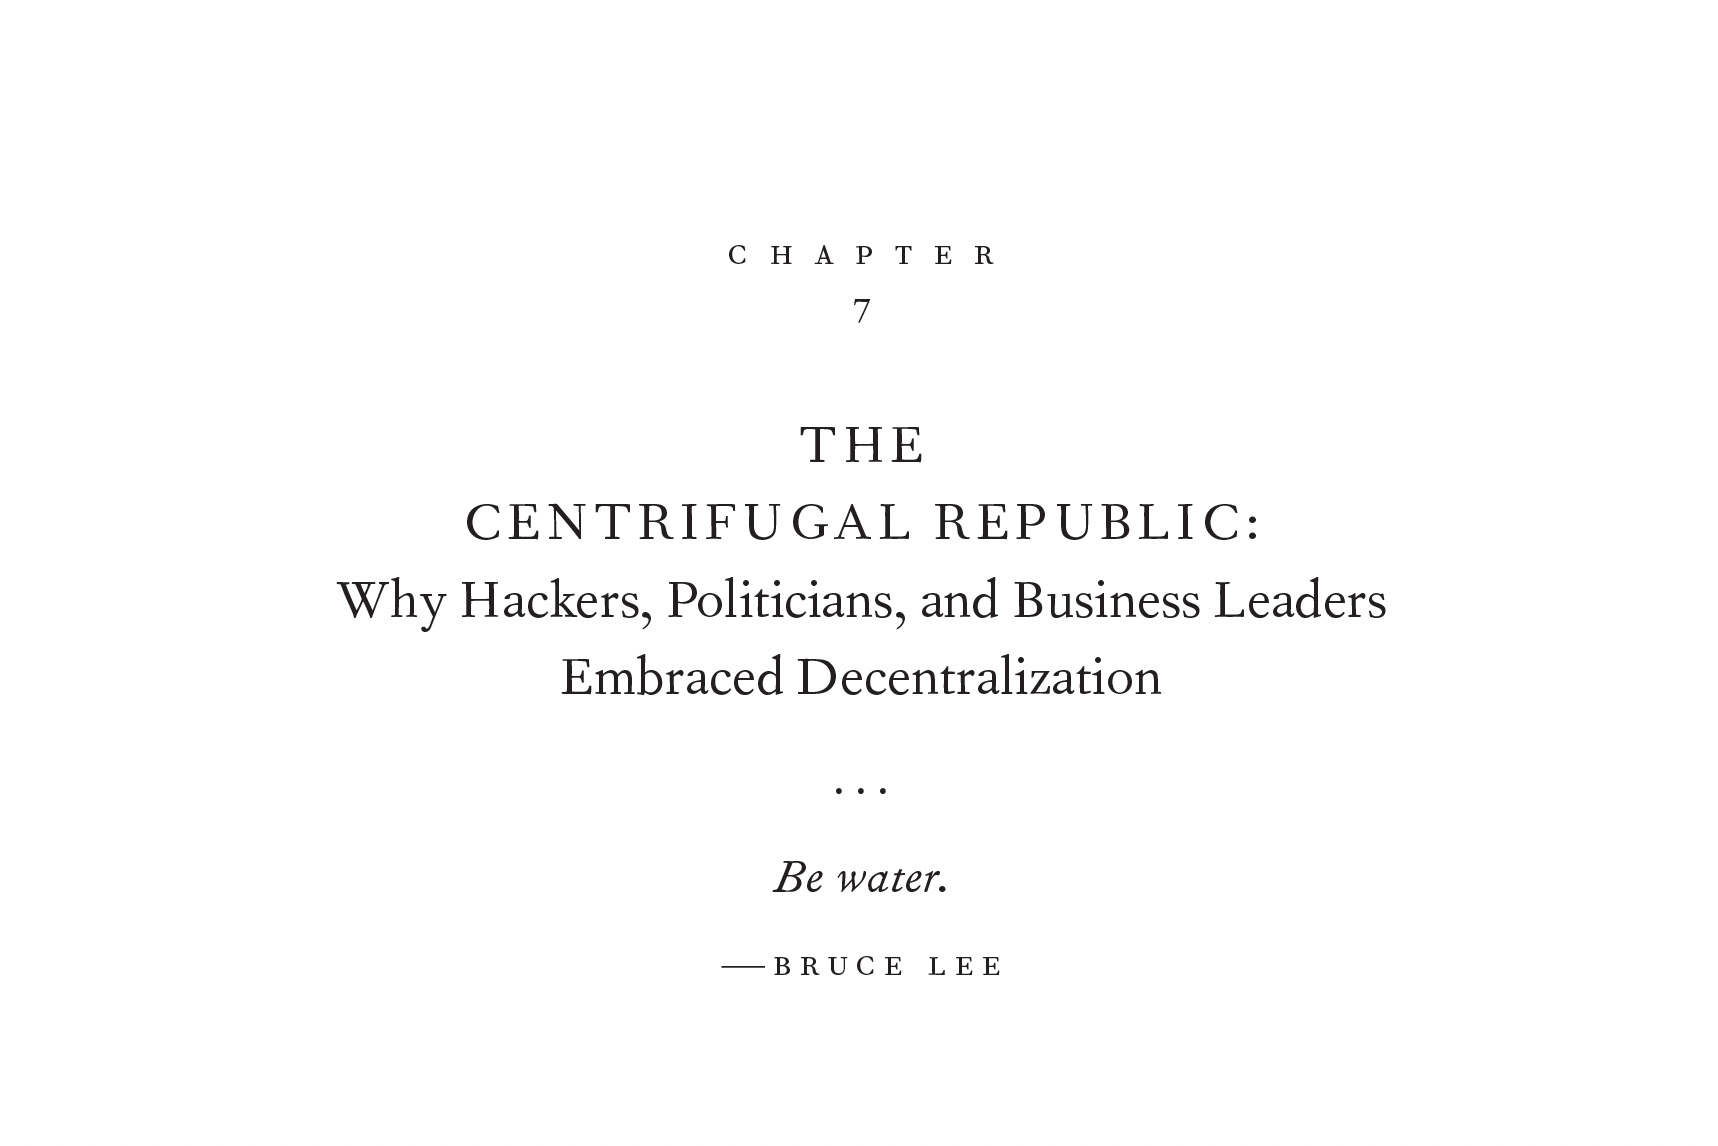 An intro page for Chapter 7, titled "The Centrifugal Republic: Why Hackers, Politicians, and Business Leaders Embraced Decolonization." Below that, a quote from Bruce Lee: "Be water."